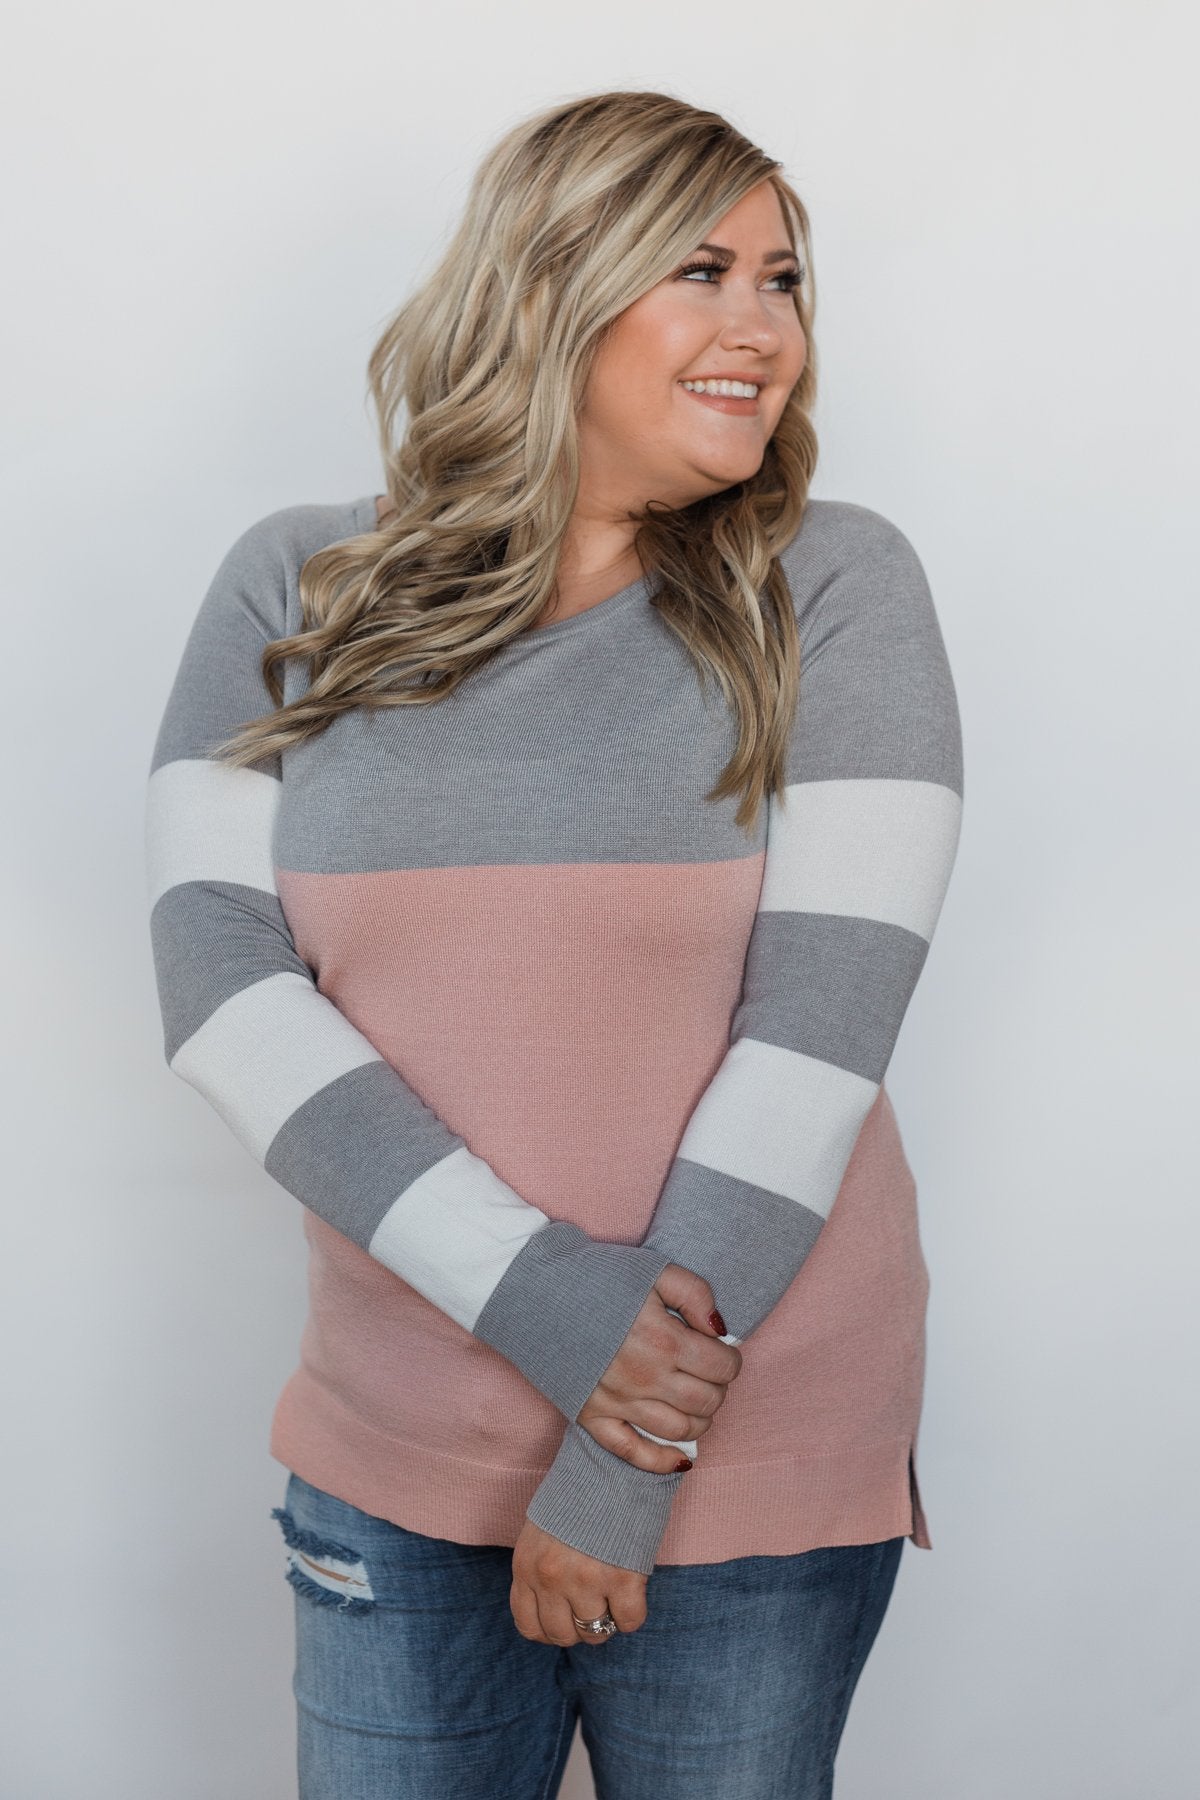 Keep Me Company Color Block Top - Grey & Dusty Pink